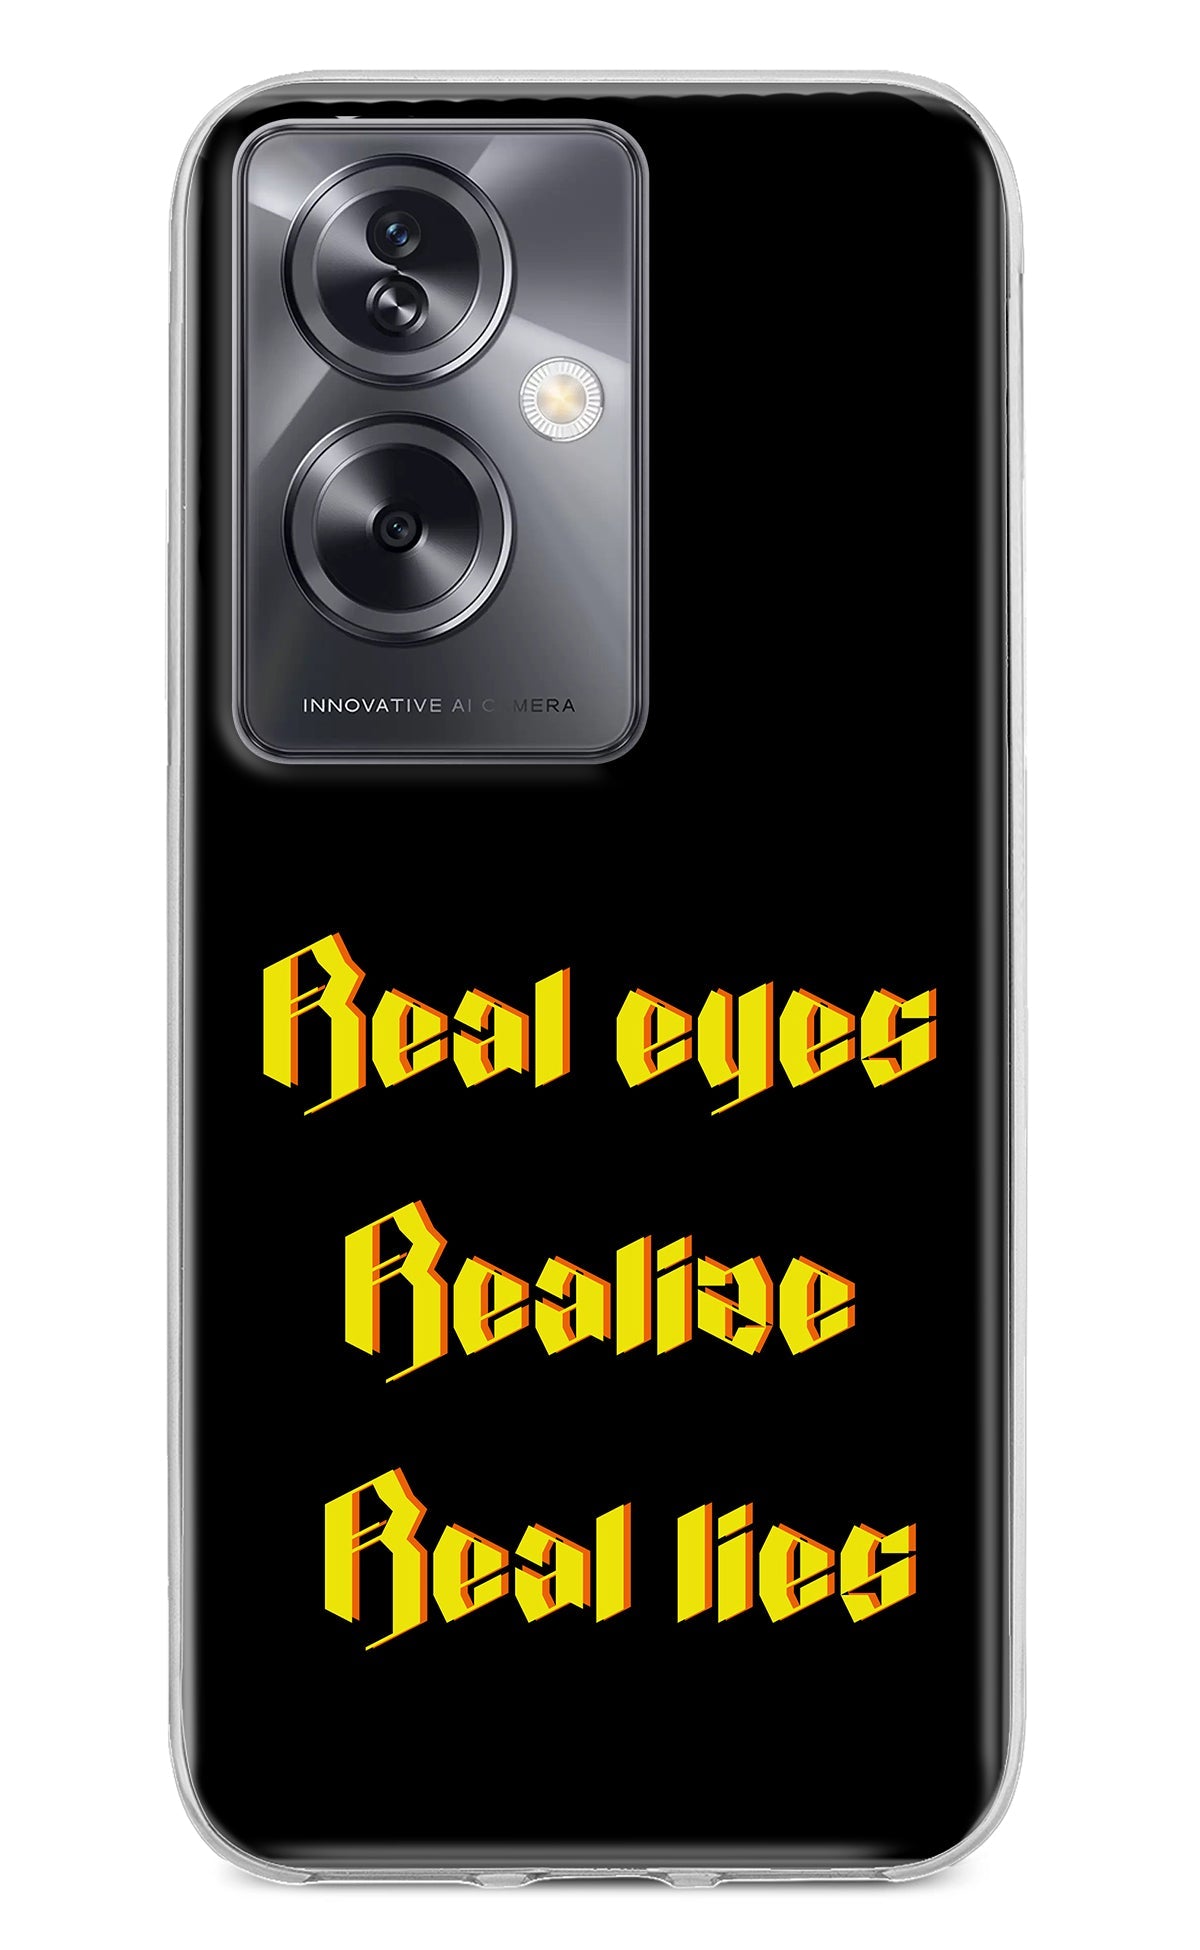 Real Eyes Realize Real Lies Oppo A79 5G Back Cover